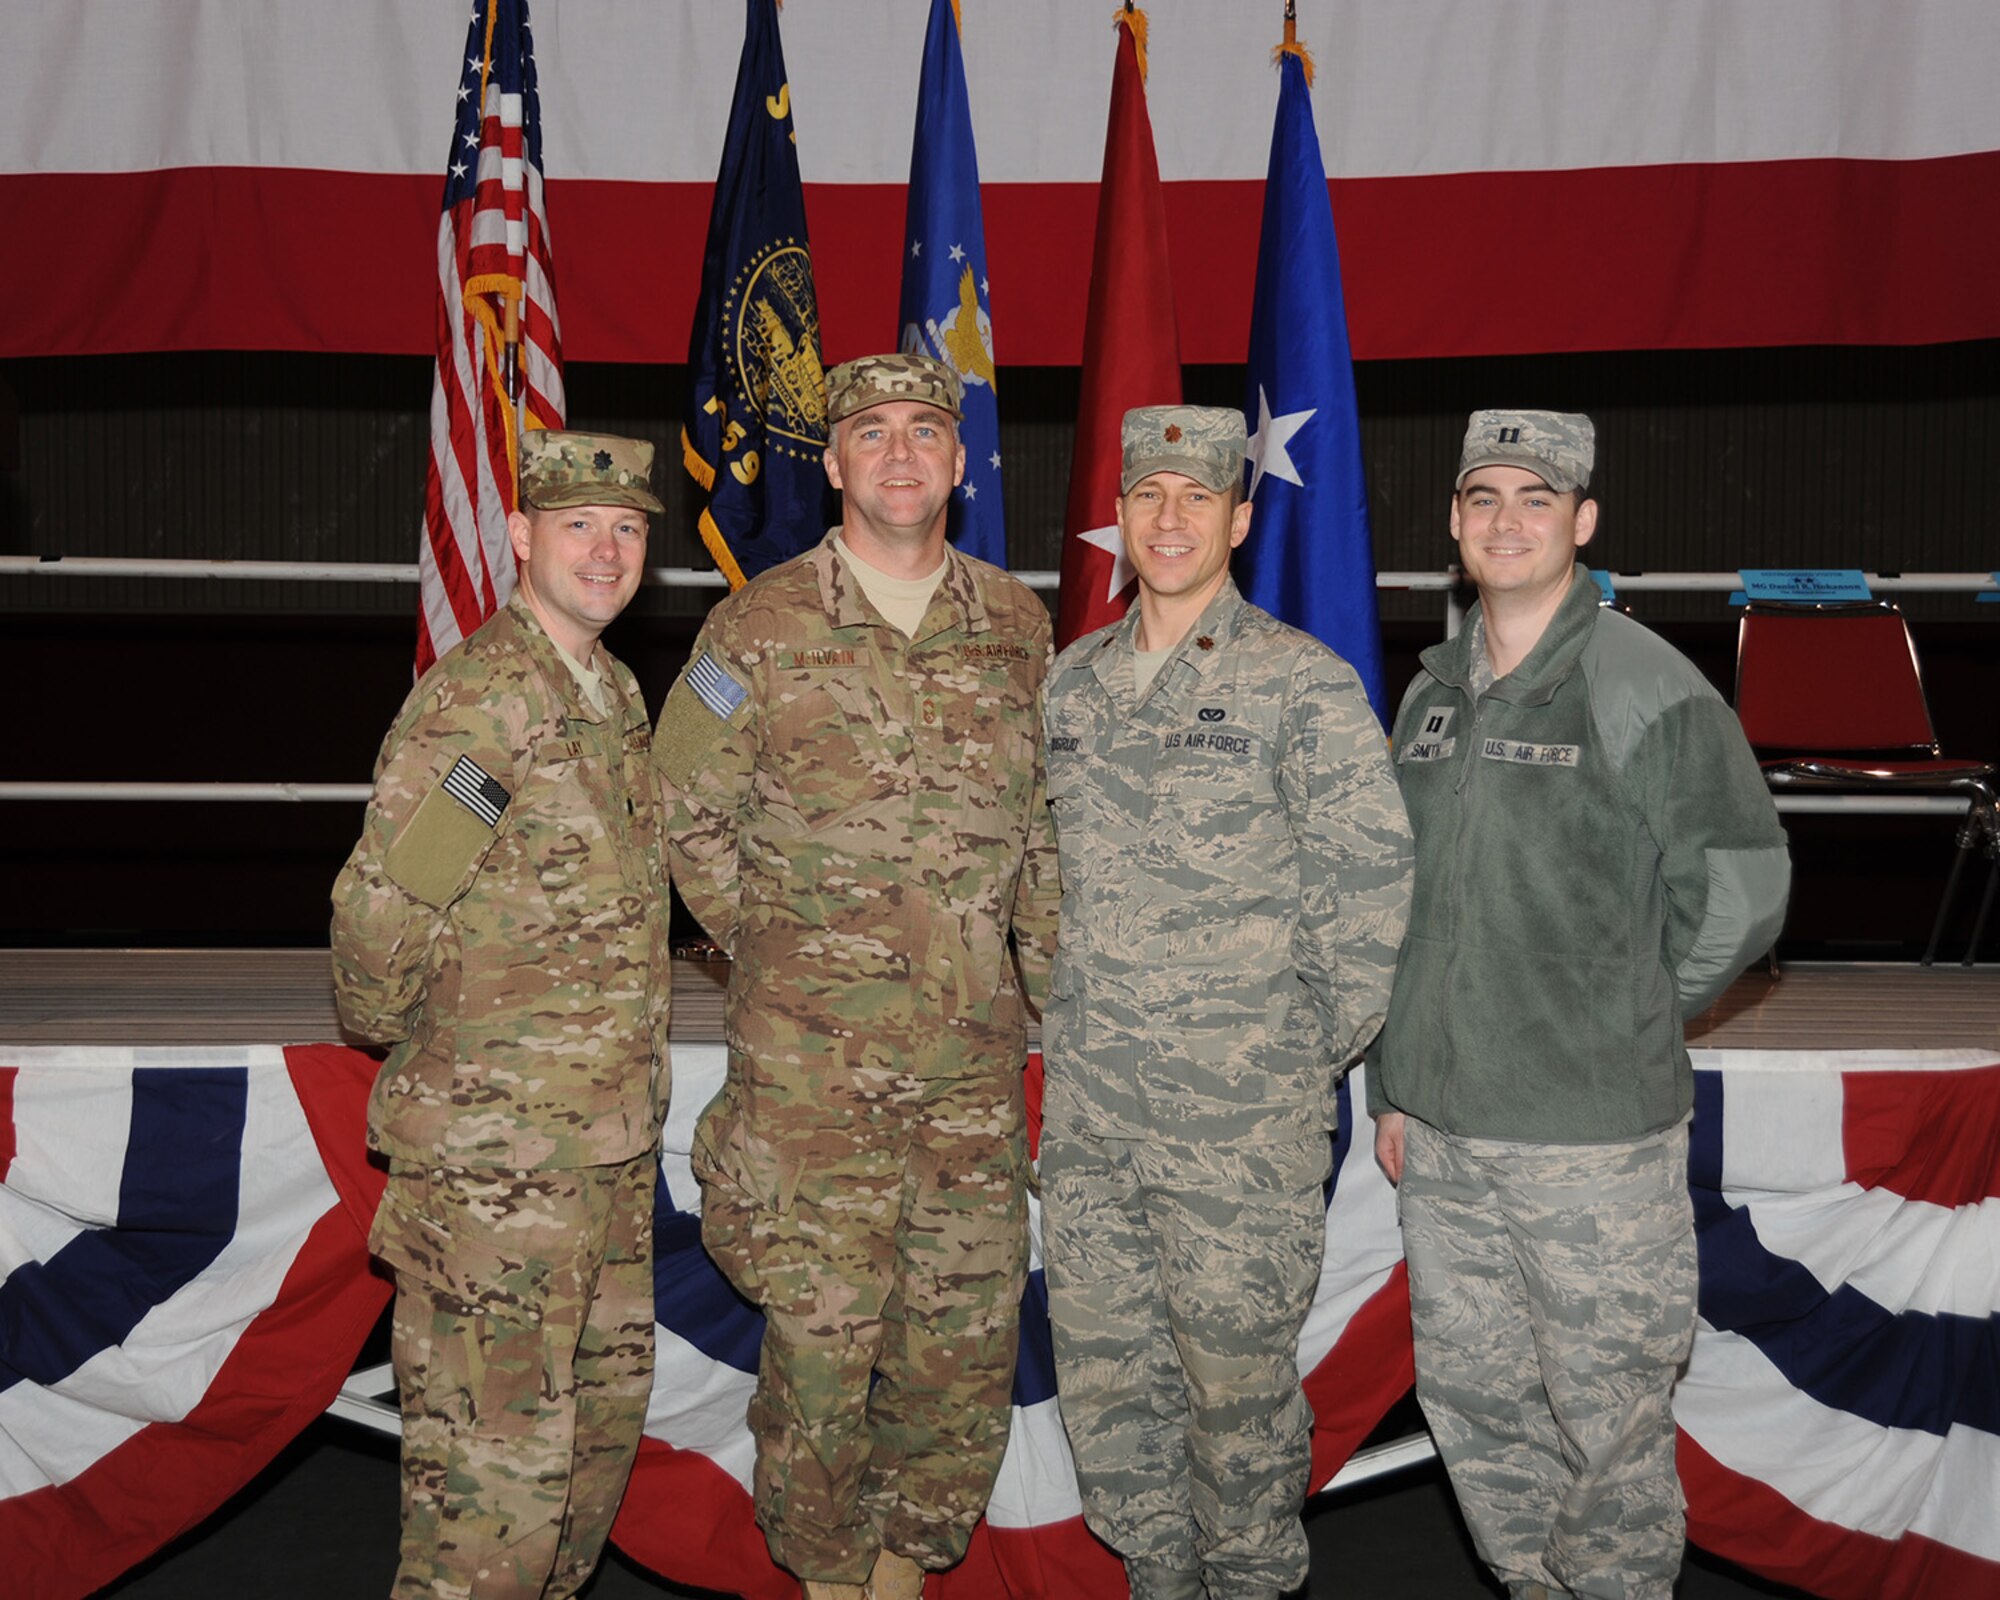 Members of the 142nd Civil Engineer Squadron leadership pose for a group picture following the mobilization ceremony held and the Portland Air National Guard Base, Ore., March 1. From left to right; Lt Col. Jason Lay, Chief Master Sgt. John McIlvain, Maj. Jacob Skugrud, and Capt. Luke Smith. (Air National Guard photo by Master Sgt. Shelly Davison, 142nd Fighter Wing Public Affairs/Released)